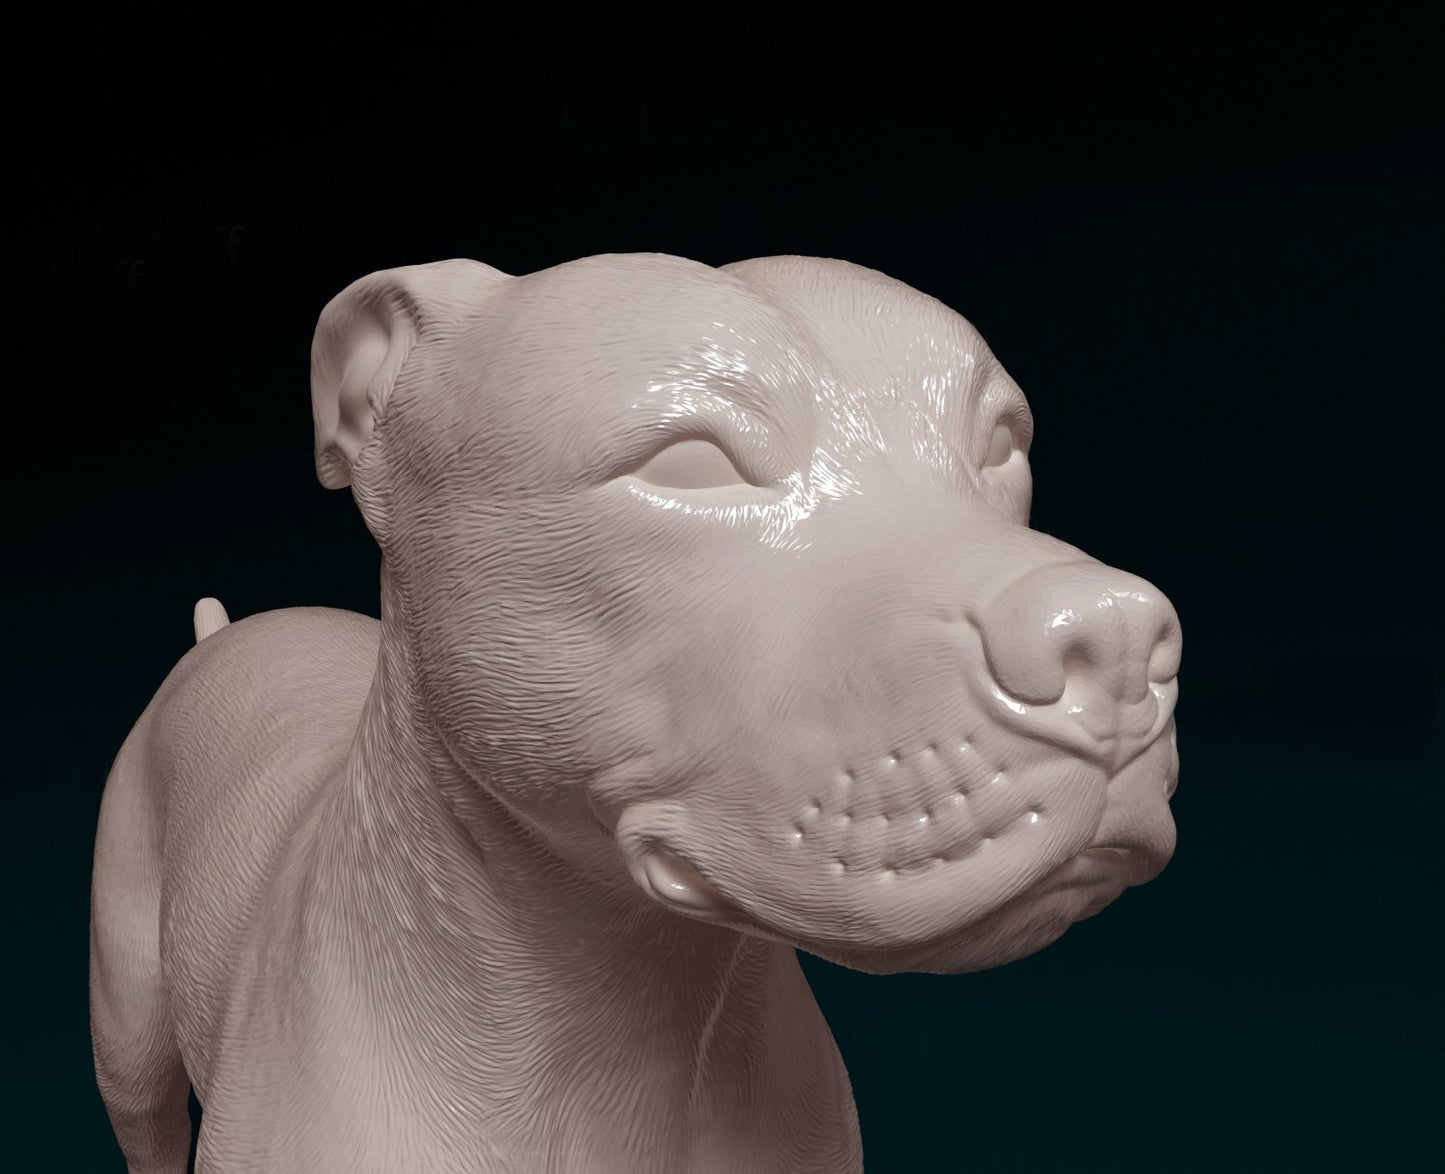 Staffordshire bull terrier x american bully dog artist resin - white resin ready to prep / paint ALL SCALES